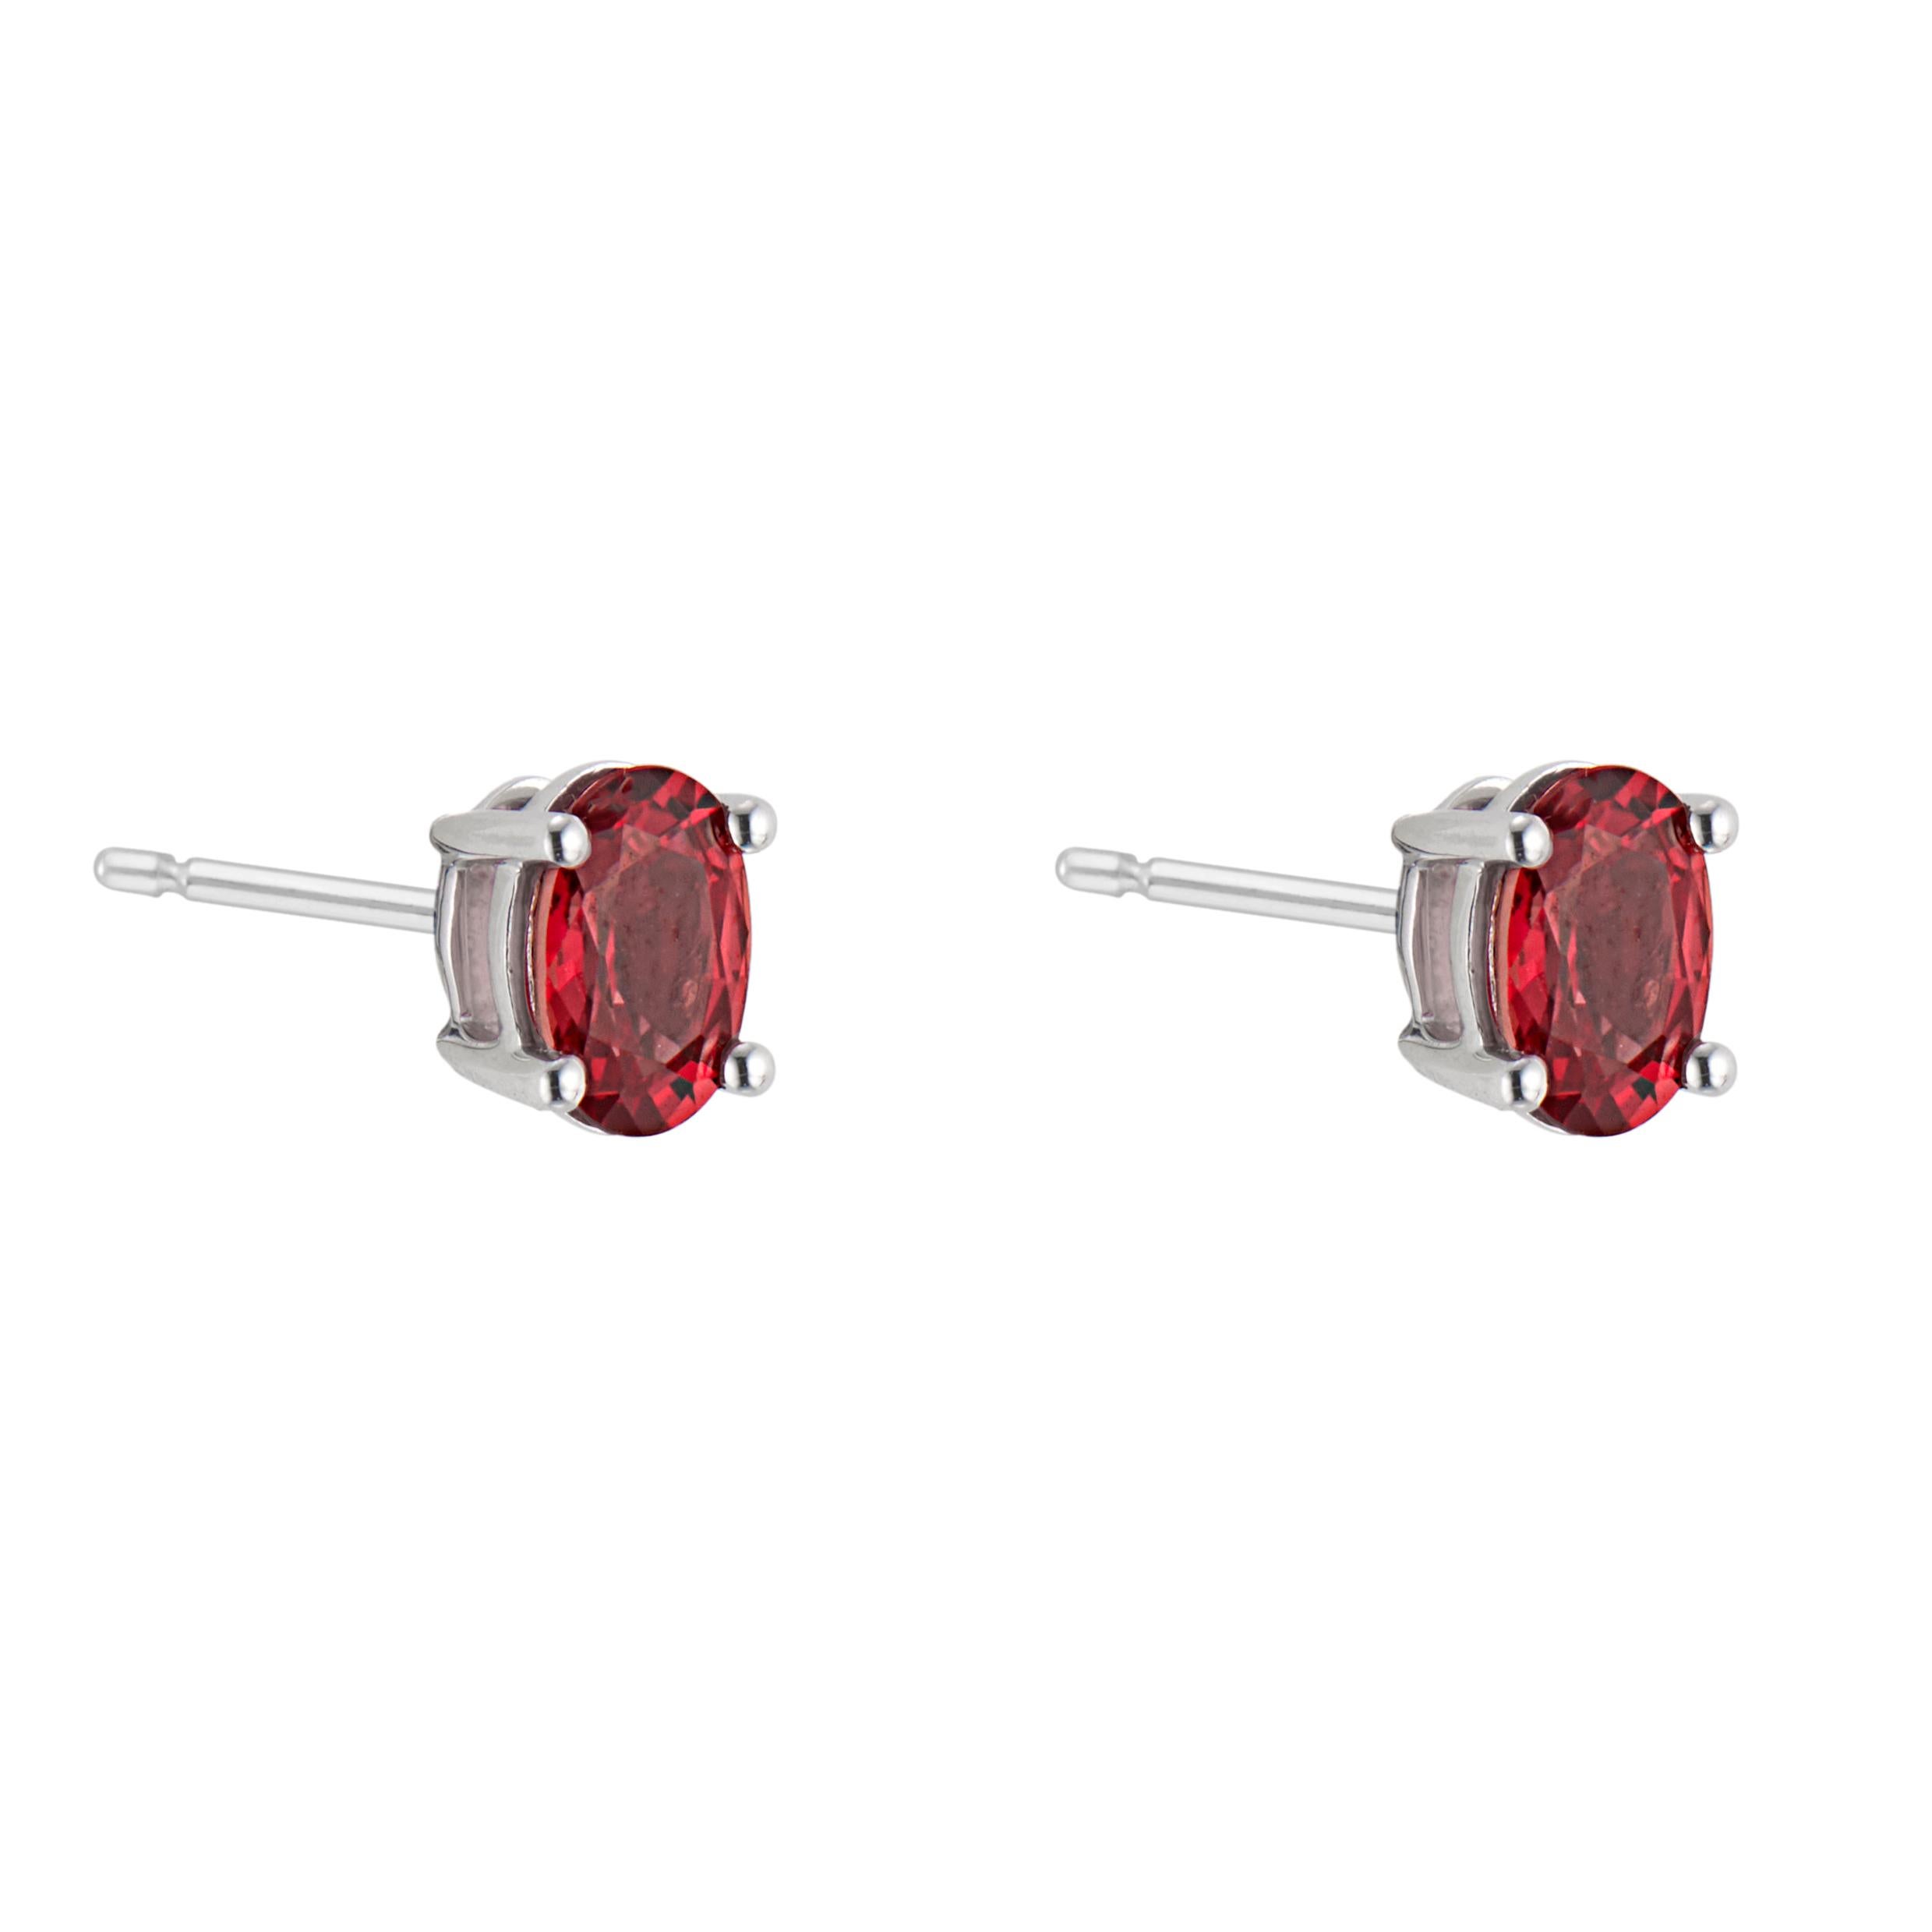 Oval Cut 1.14 Carat Red Orange Sapphire White Gold Stud Earrings For Sale